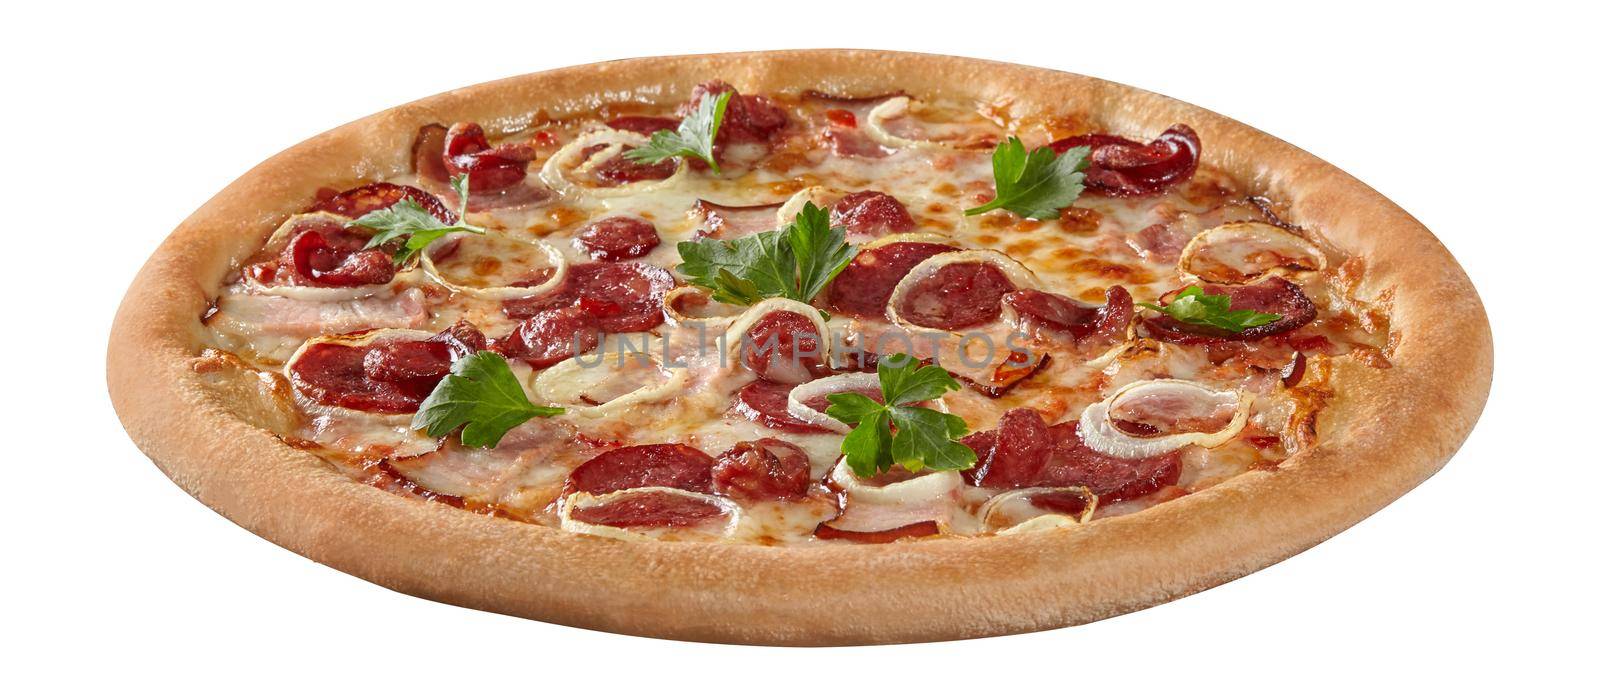 Closeup of pizza with bacon, salami, hunting sausages, onions, mozzarella and parsley isolated on white by nazarovsergey